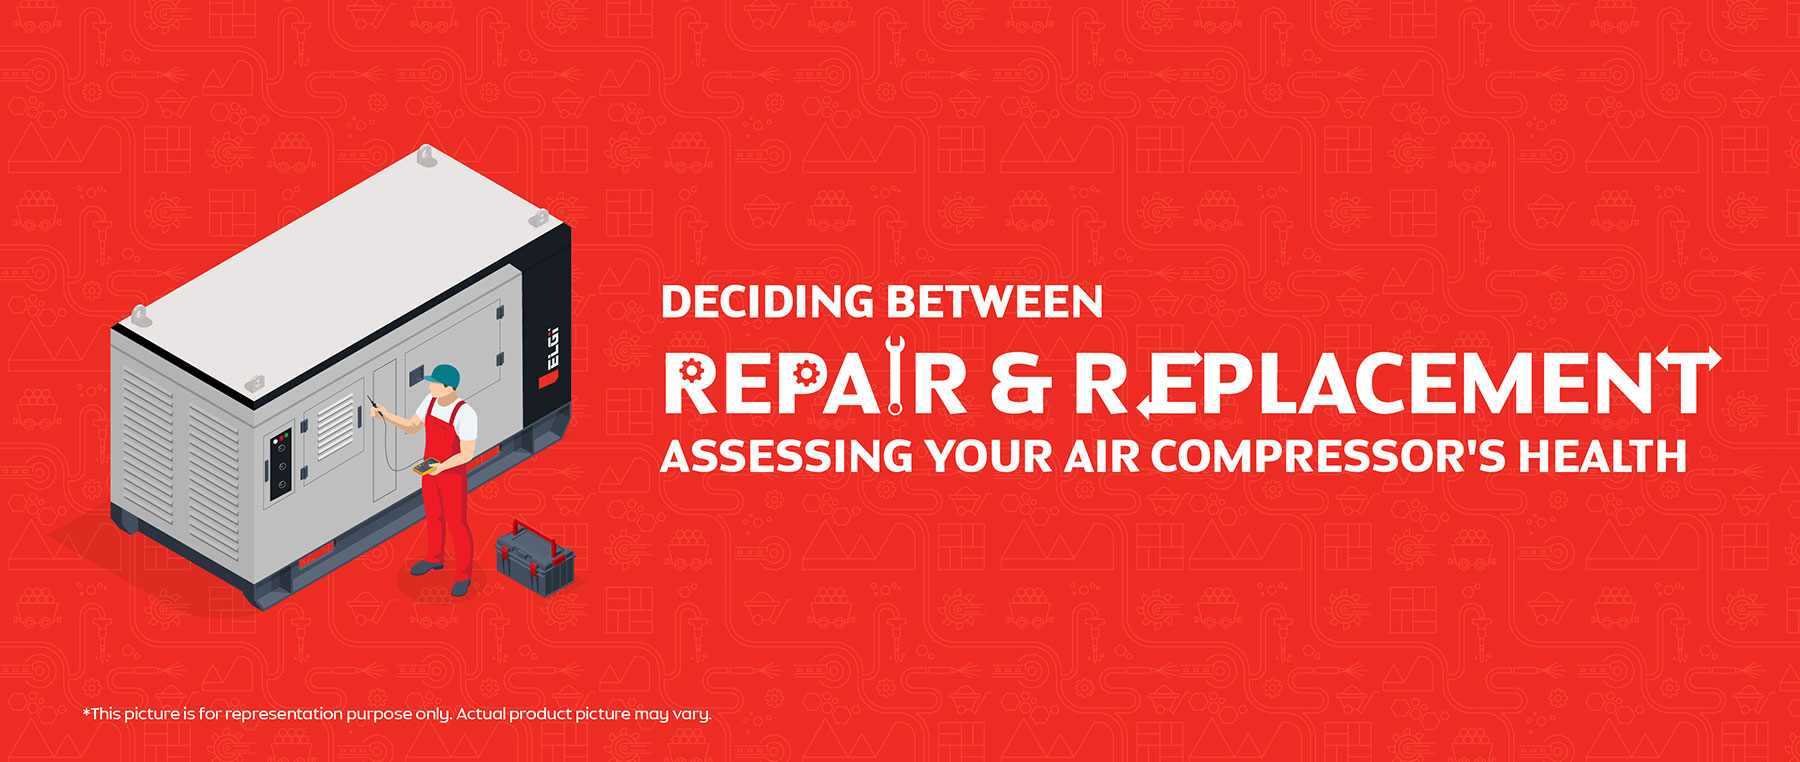 Deciding Between Repair and Replacement: Assessing Your Air Compressor’s Health